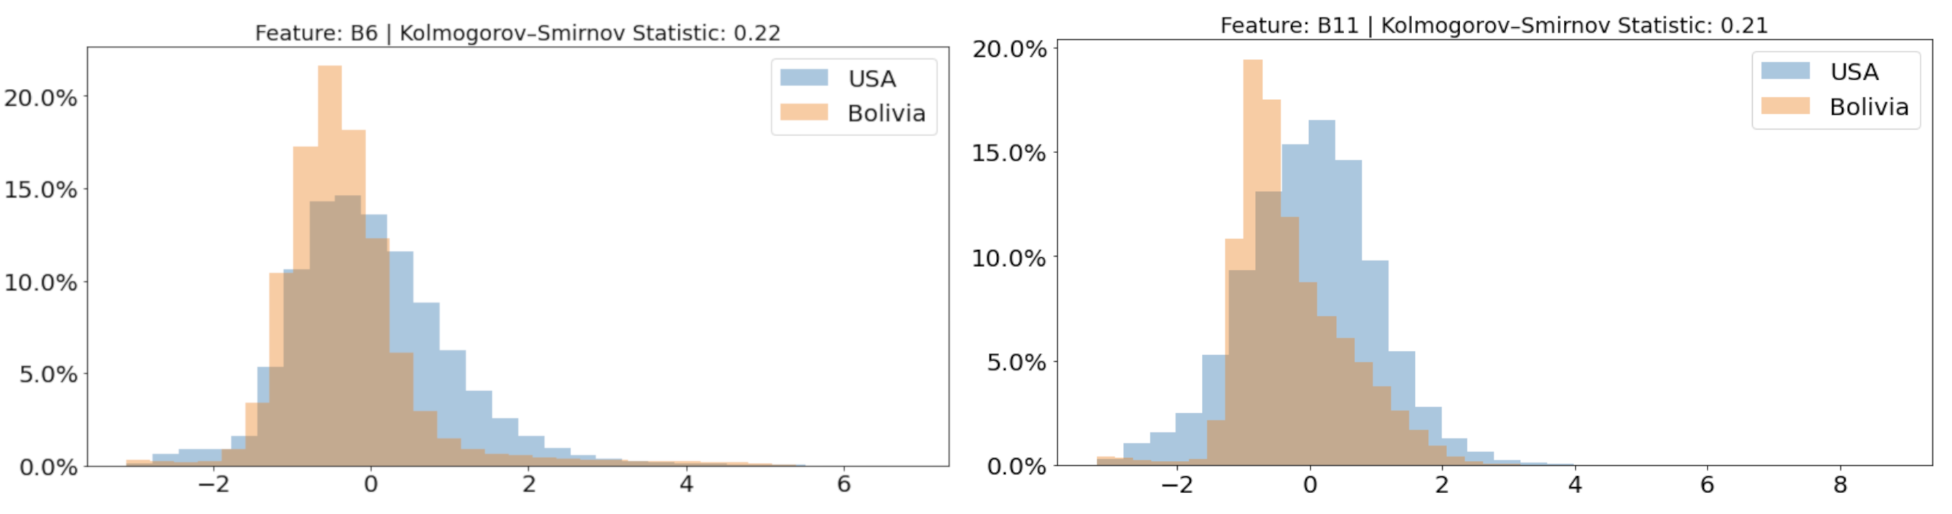 Distributions in USA and Bolivia